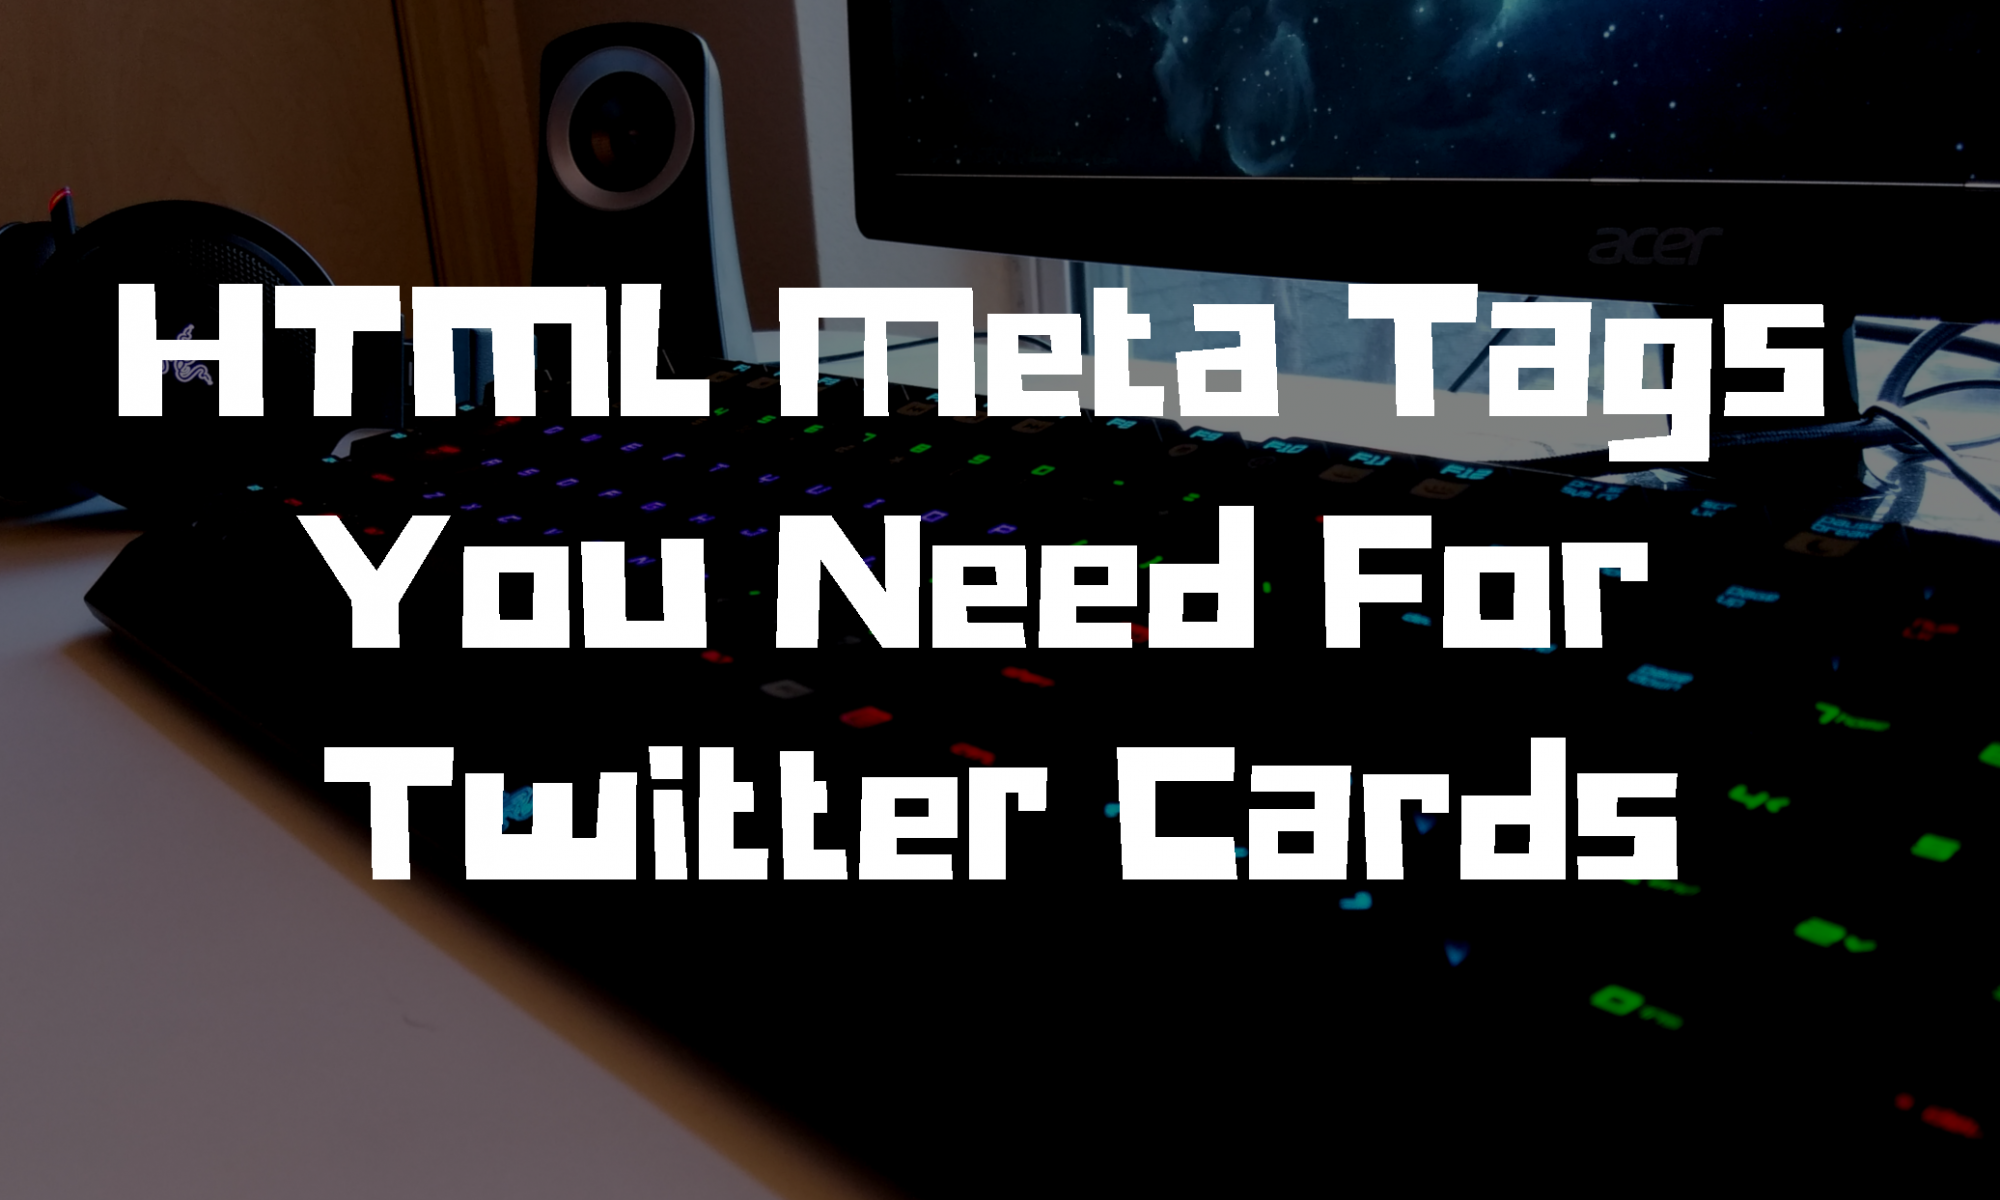 HTML Meta Tags You Need For Twitter Cards